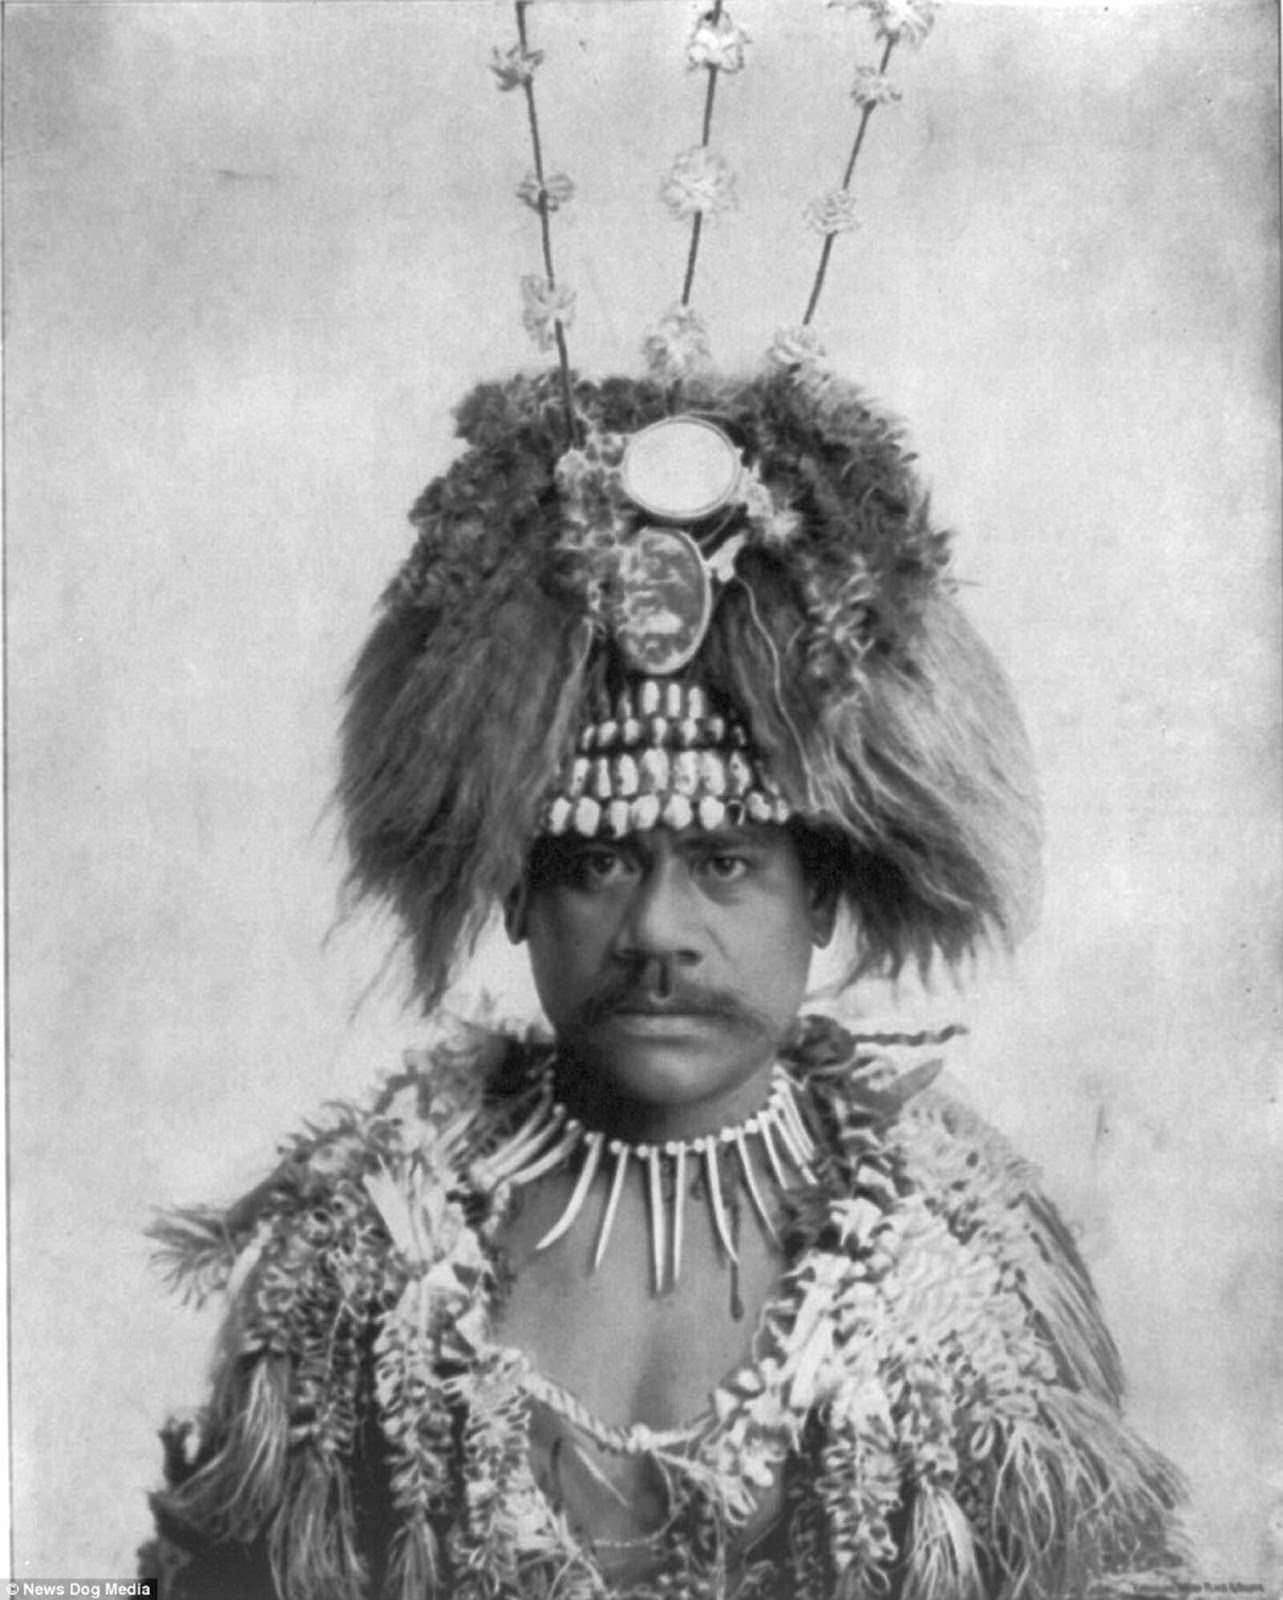 A man in native headgear and dress at the World’s Columbian Exposition in Chicago, Illinois in about 1893.